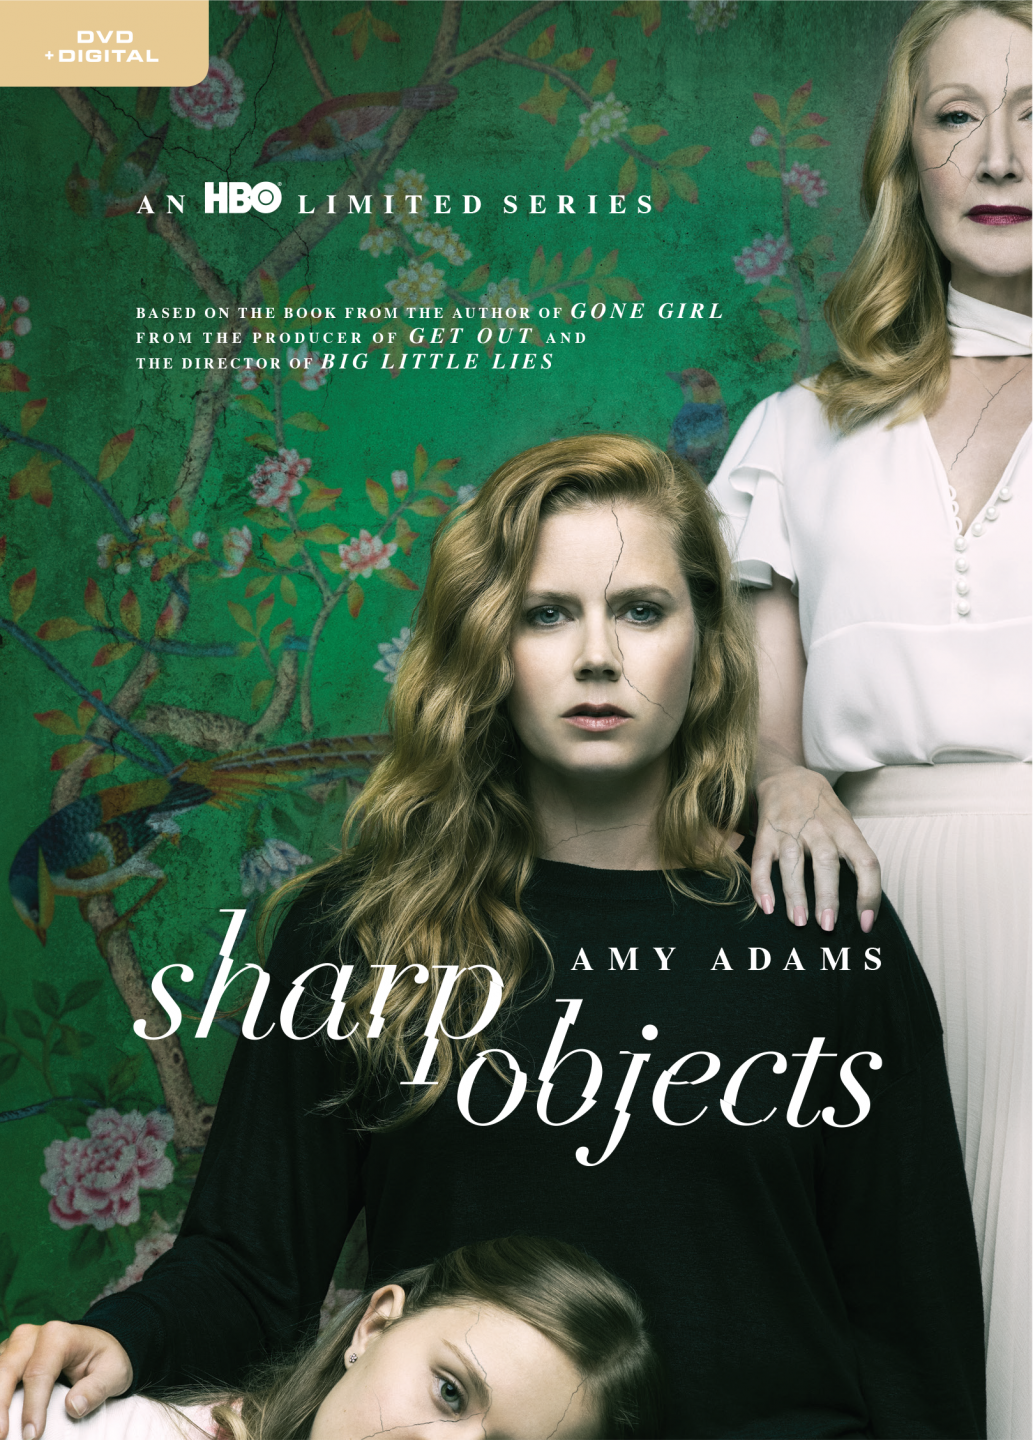 Sharp Objects DVD cover (HBO)